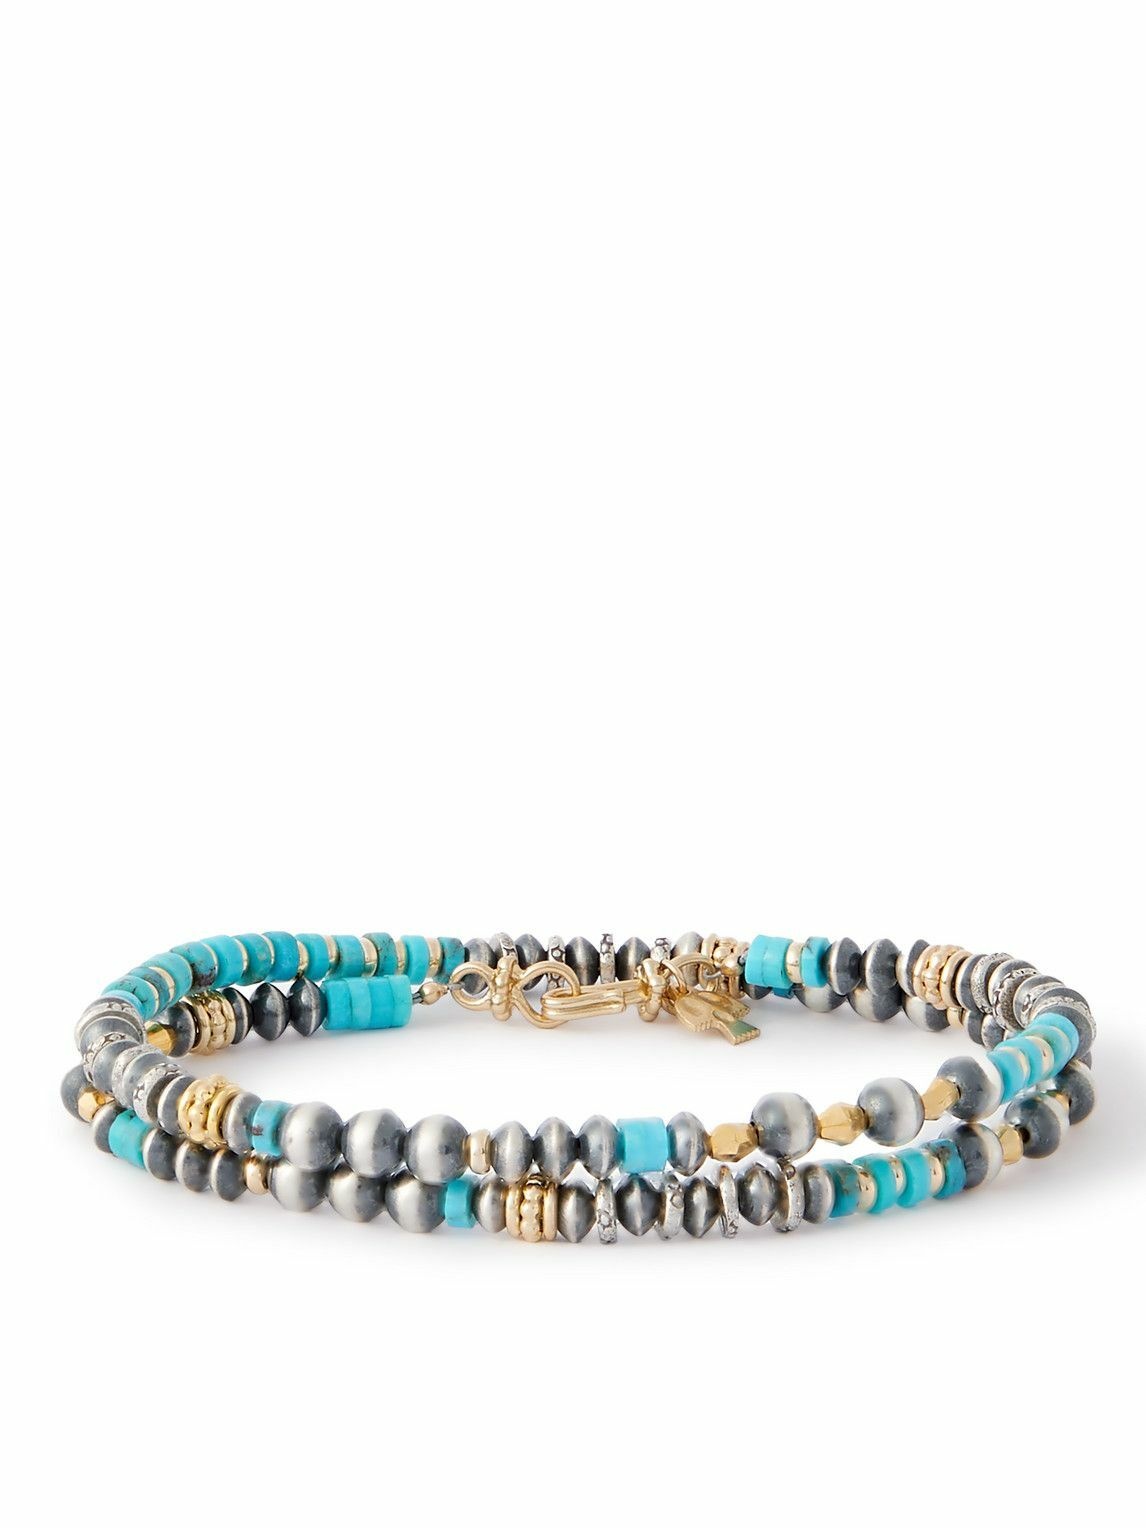 Photo: Peyote Bird - Le Mans Silver, Gold-Plated and Turquoise Beaded Wrap Bracelet